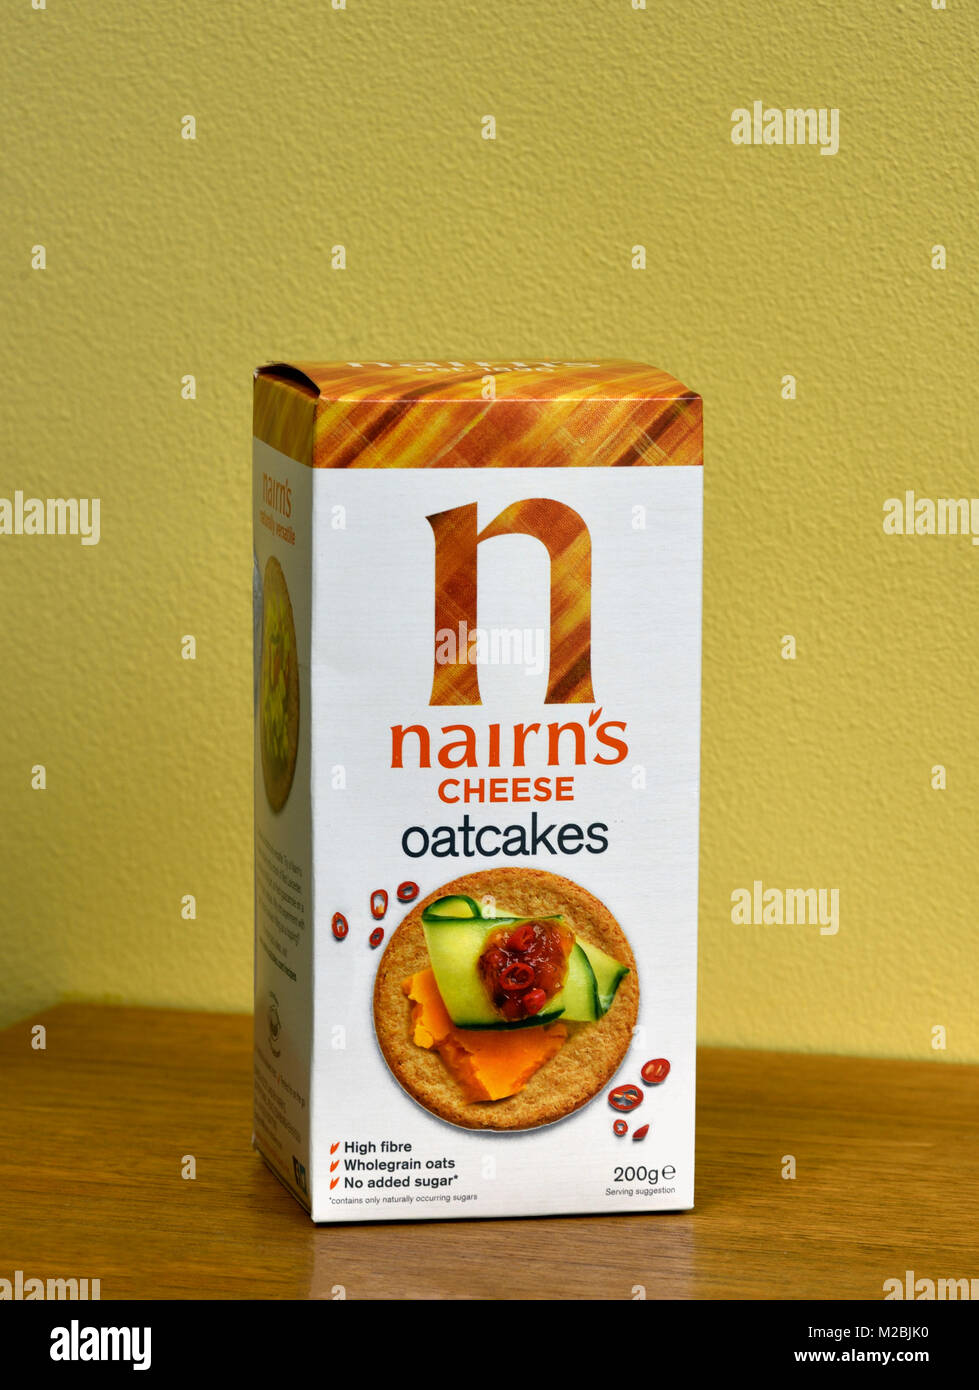 Packet of Nairn's Cheese Oatcakes. High fibre, wholegrain oats, no added sugar. 200g. Stock Photo